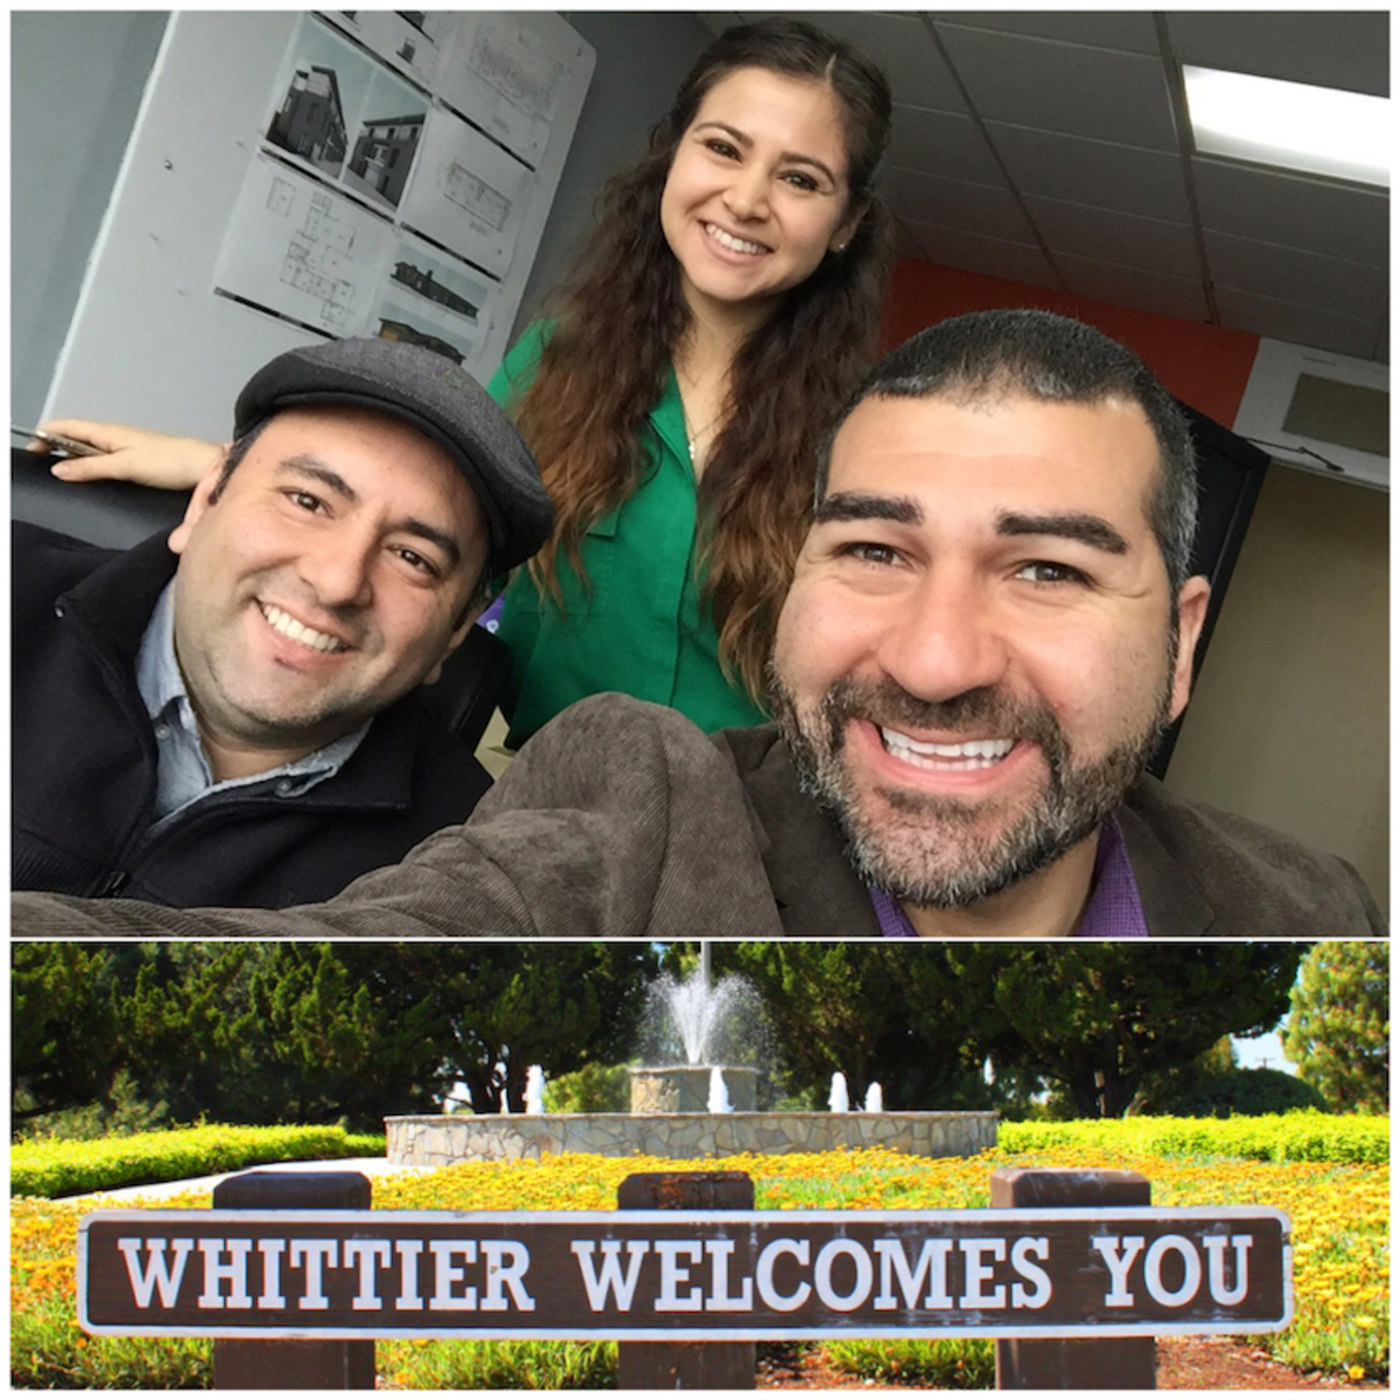 What‘s Up, Whittier?